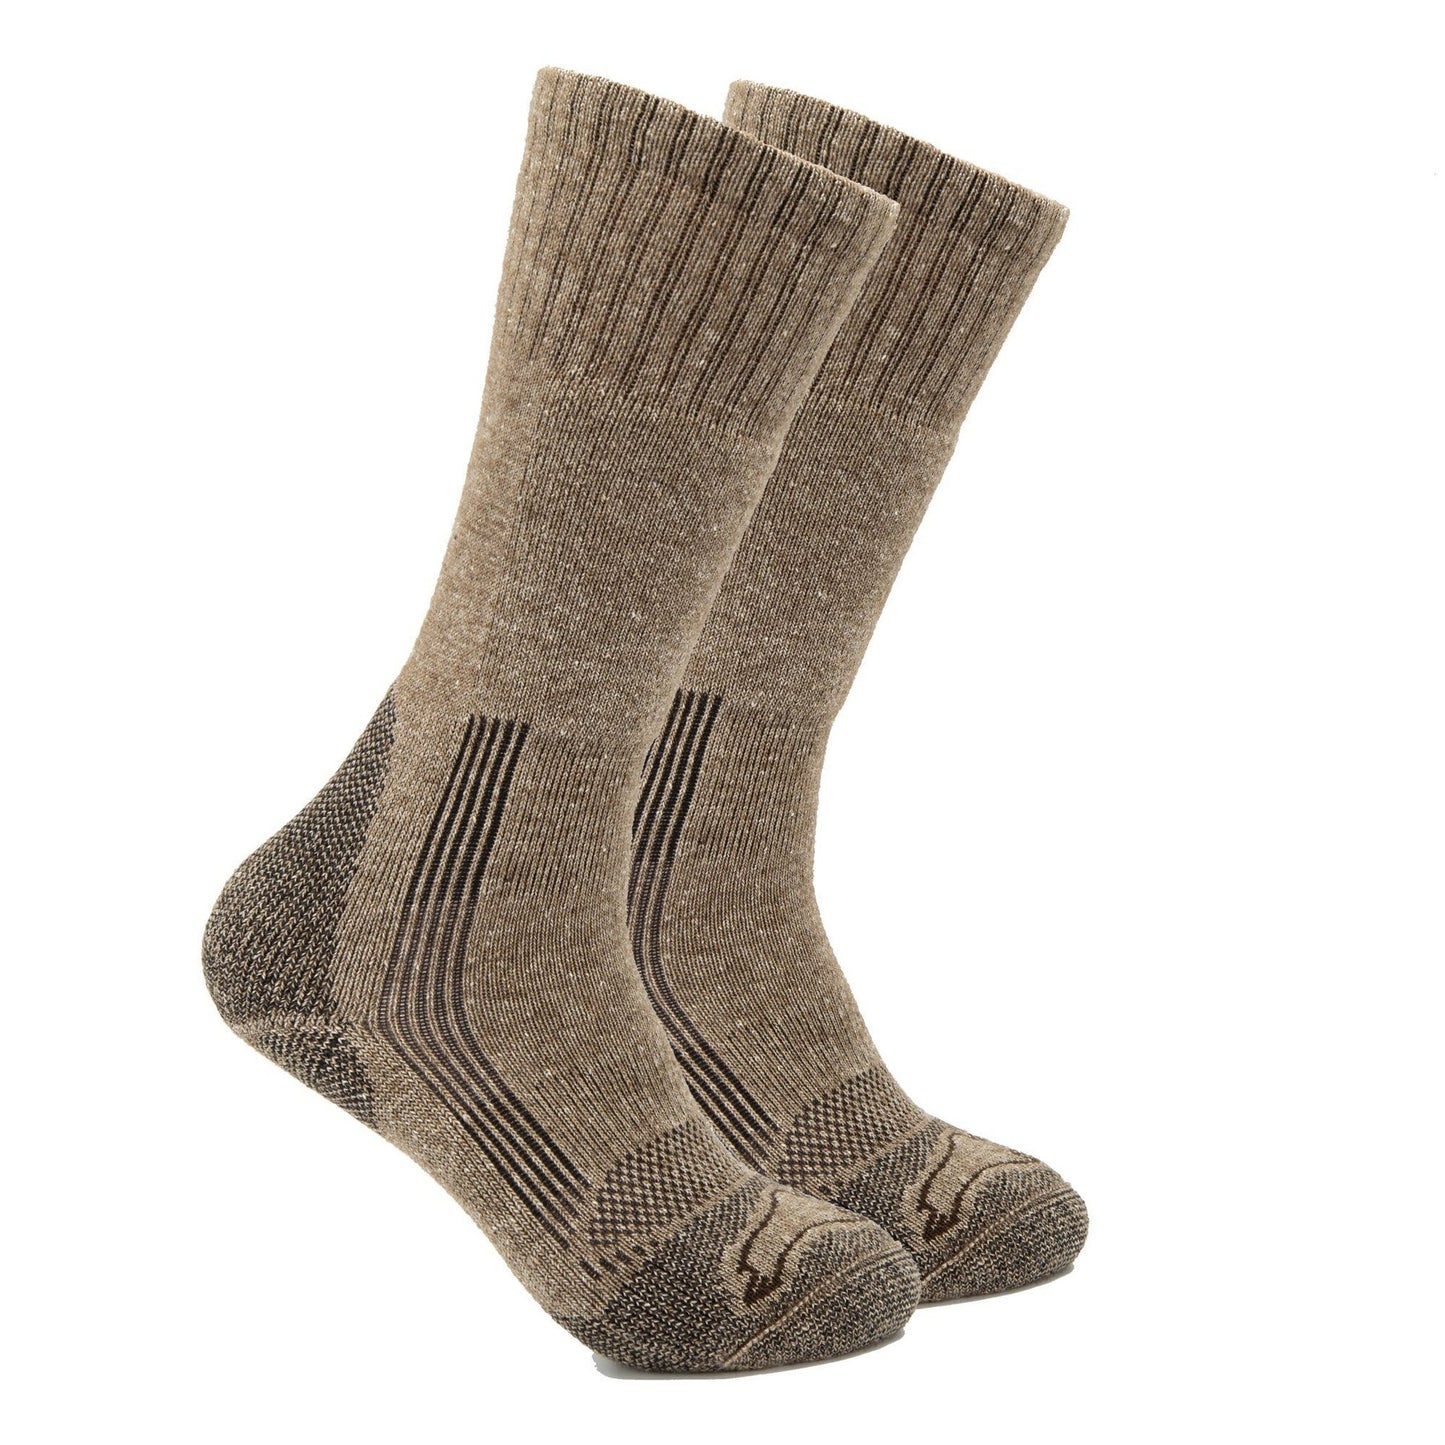 American Bison - Pro-Gear Technical Bison/Silk Boot Sock